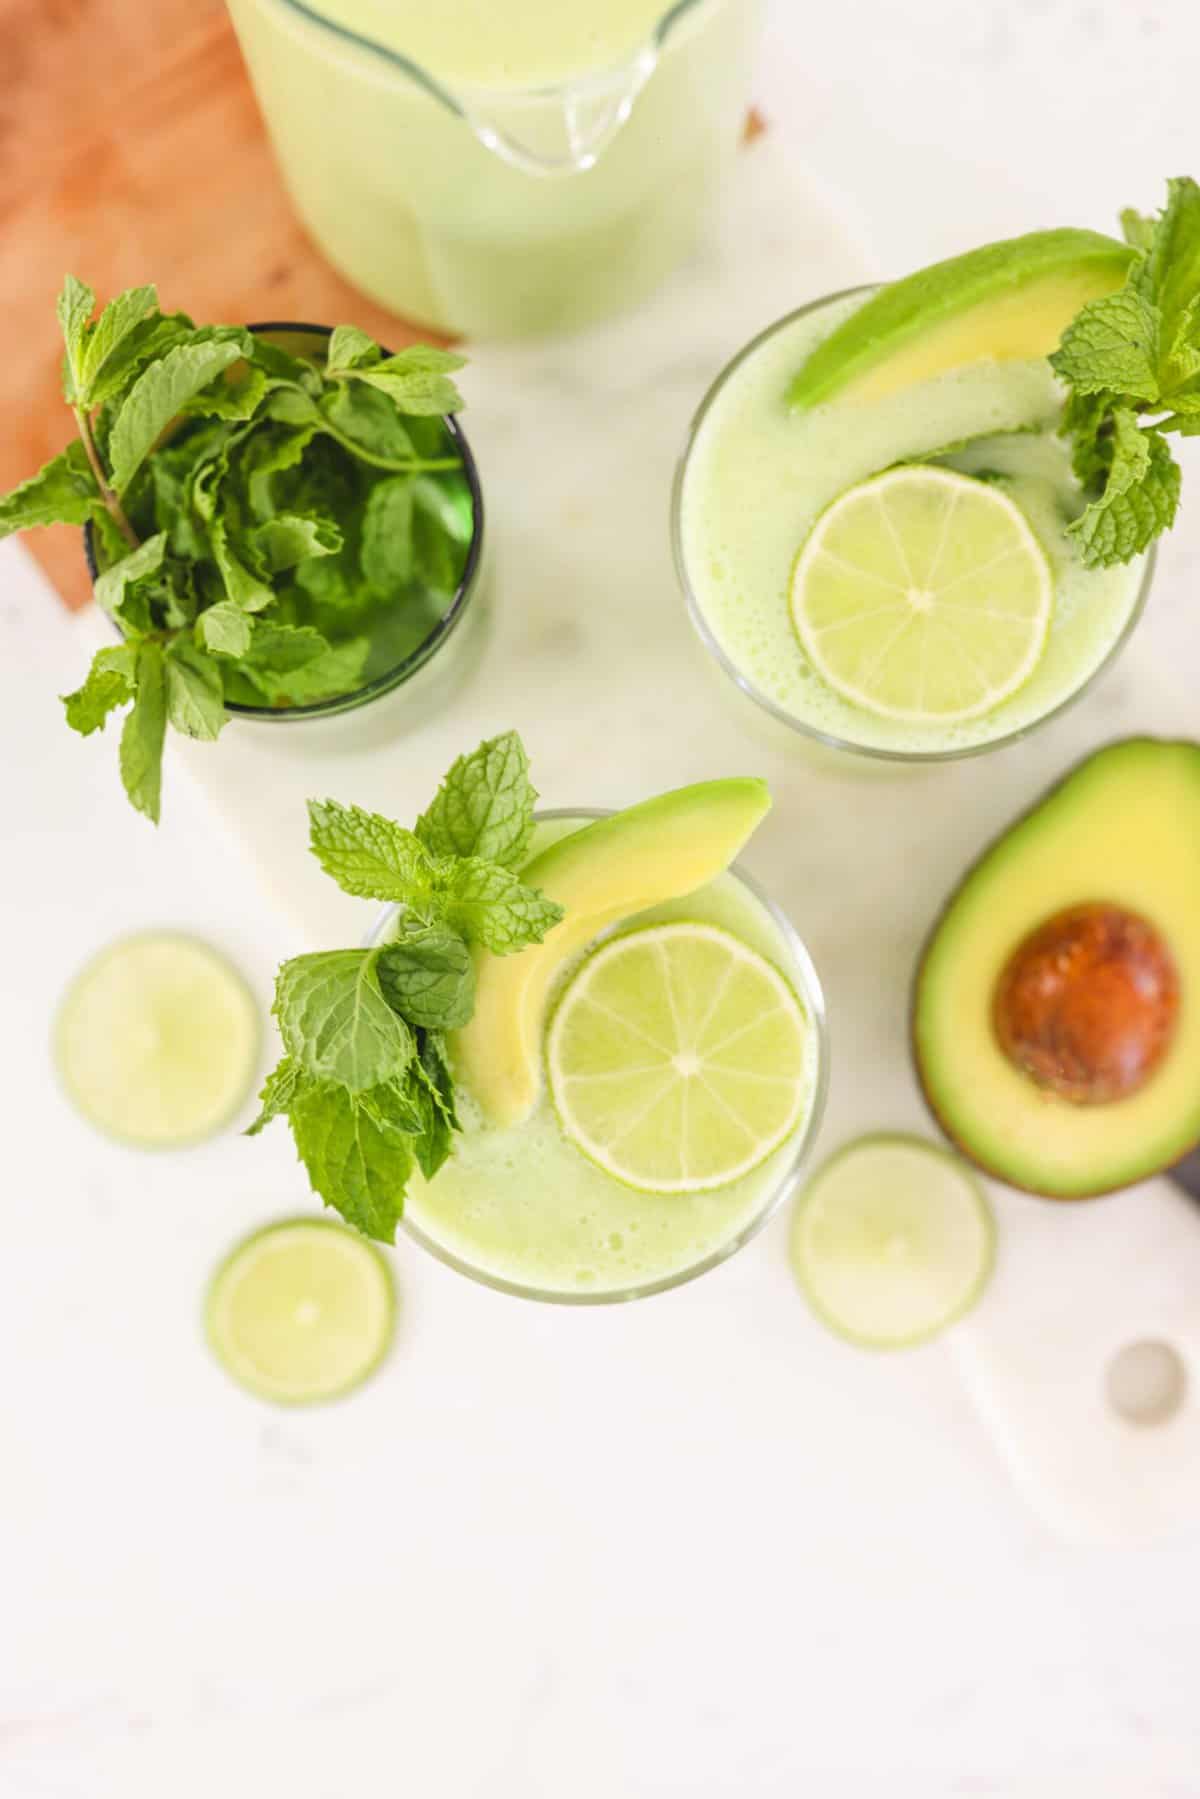  Sip on a taste of California with this refreshing avocado cooler 🍹